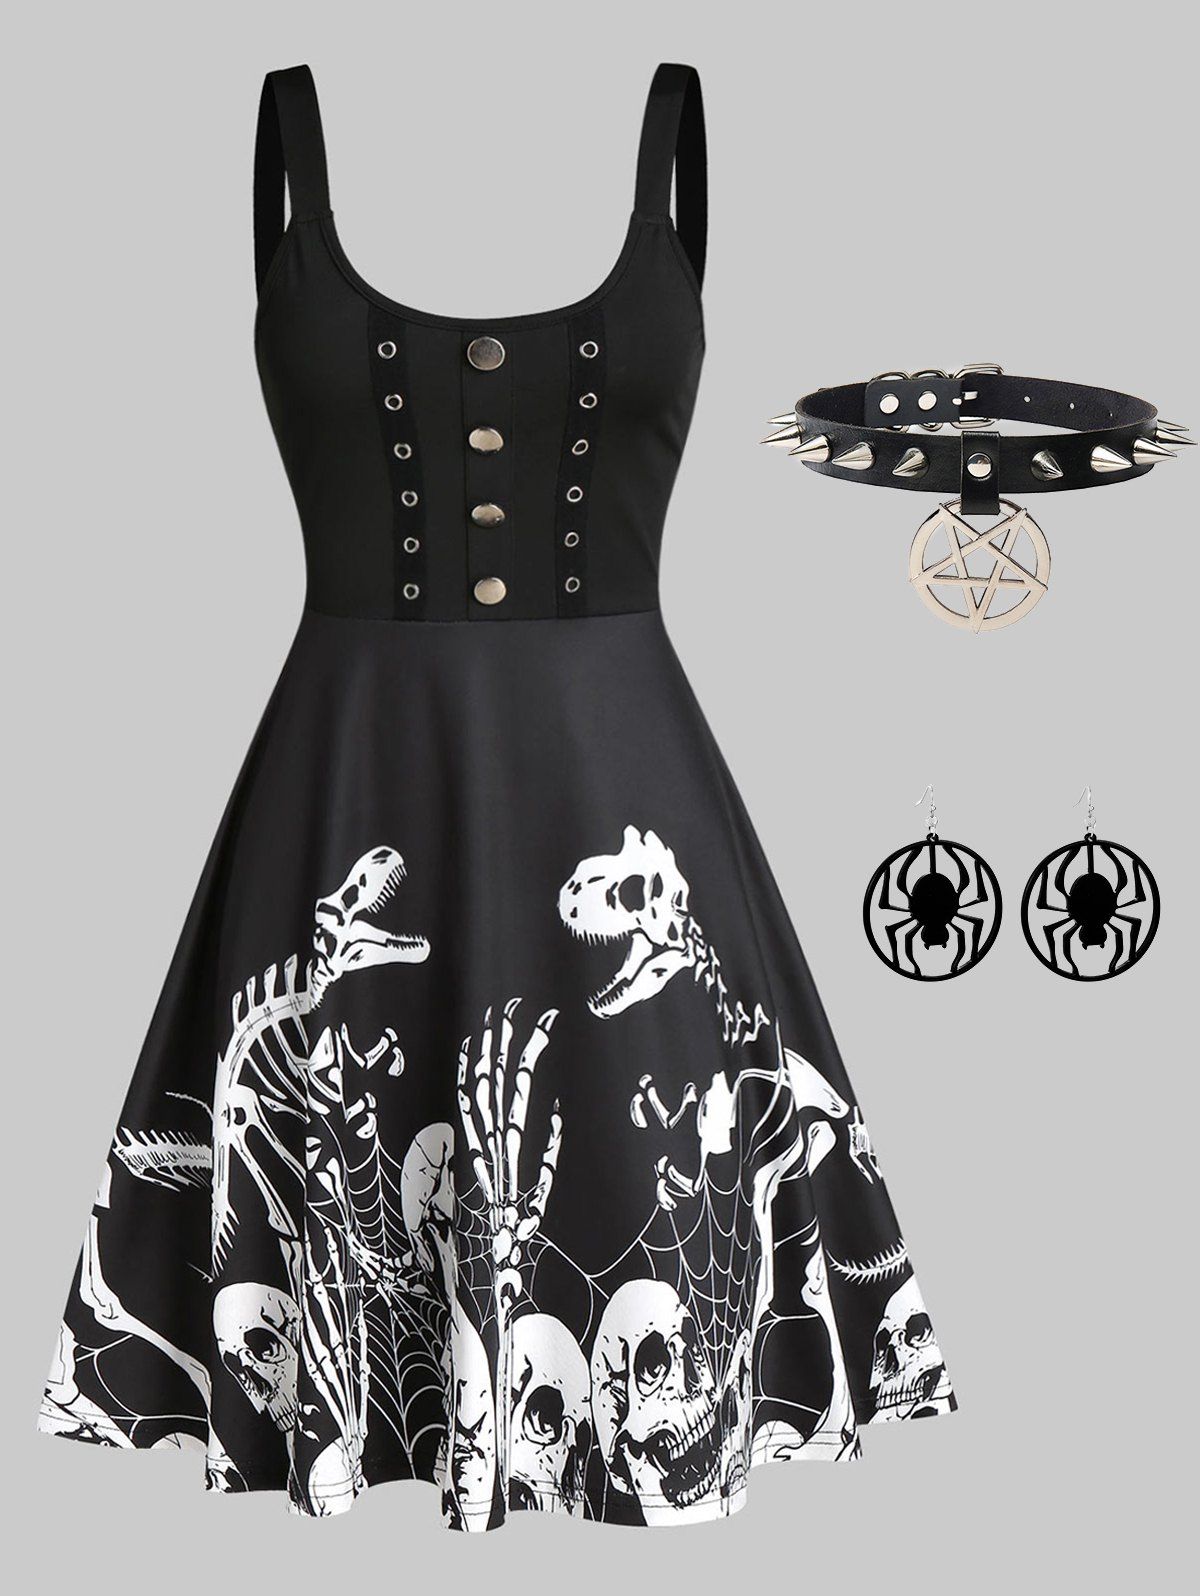 Dinosaur Skeleton Print A Line Dress And Star Rivets Choker Spider Earrings Gothic Outfit - BLACK S